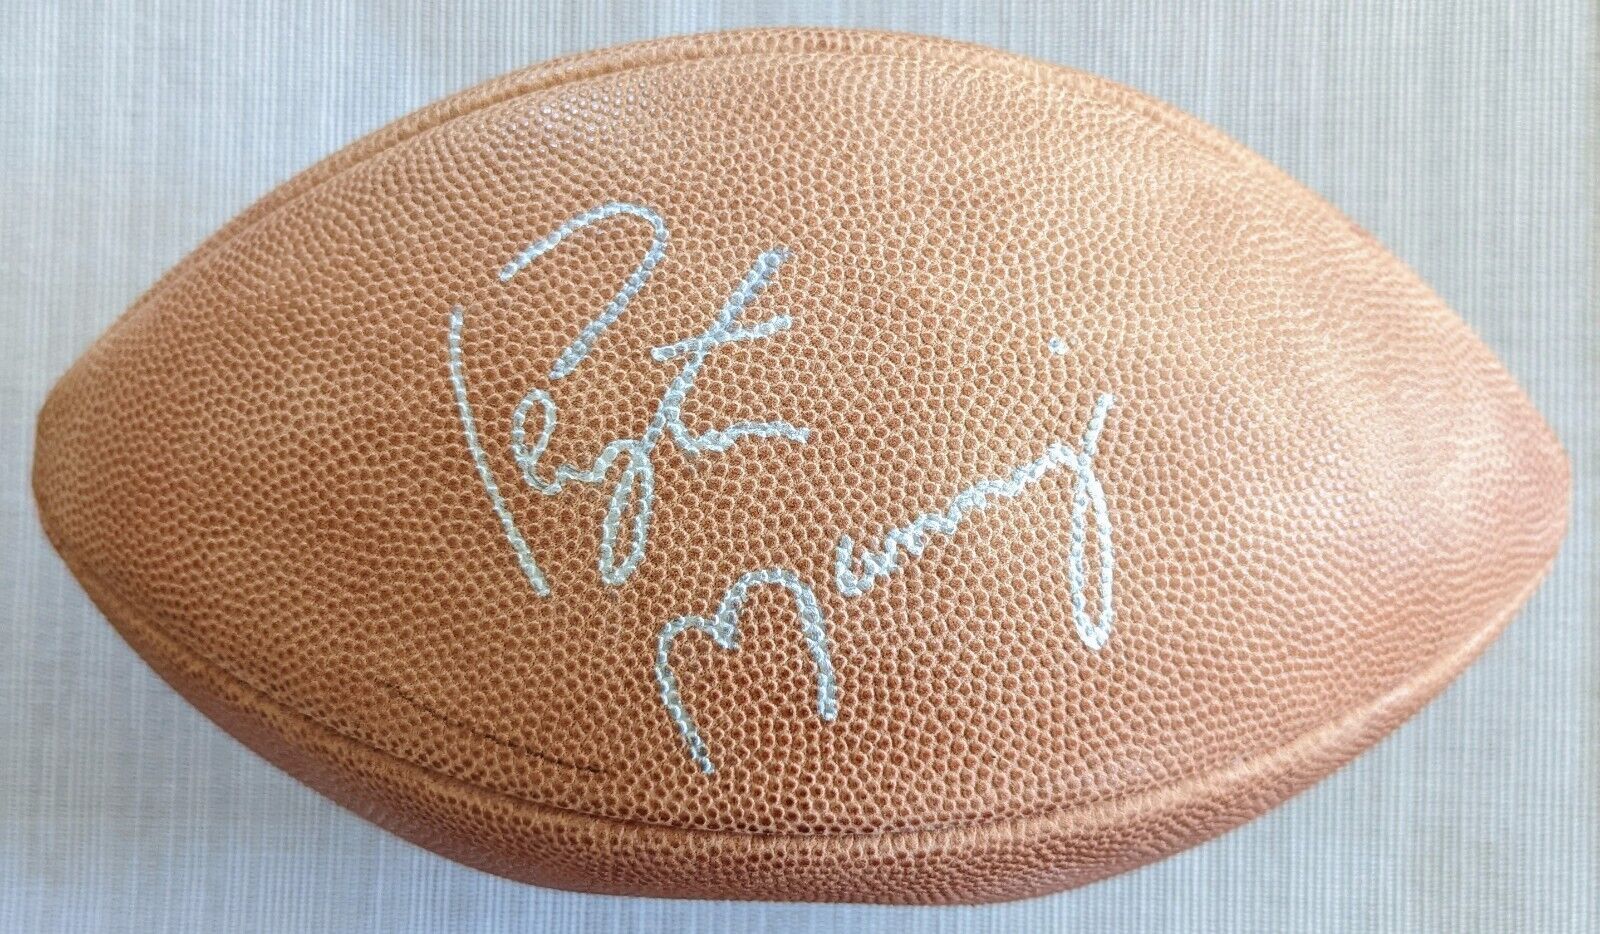 Peyton Manning Signed Autographed Official Nfl Wilson Football